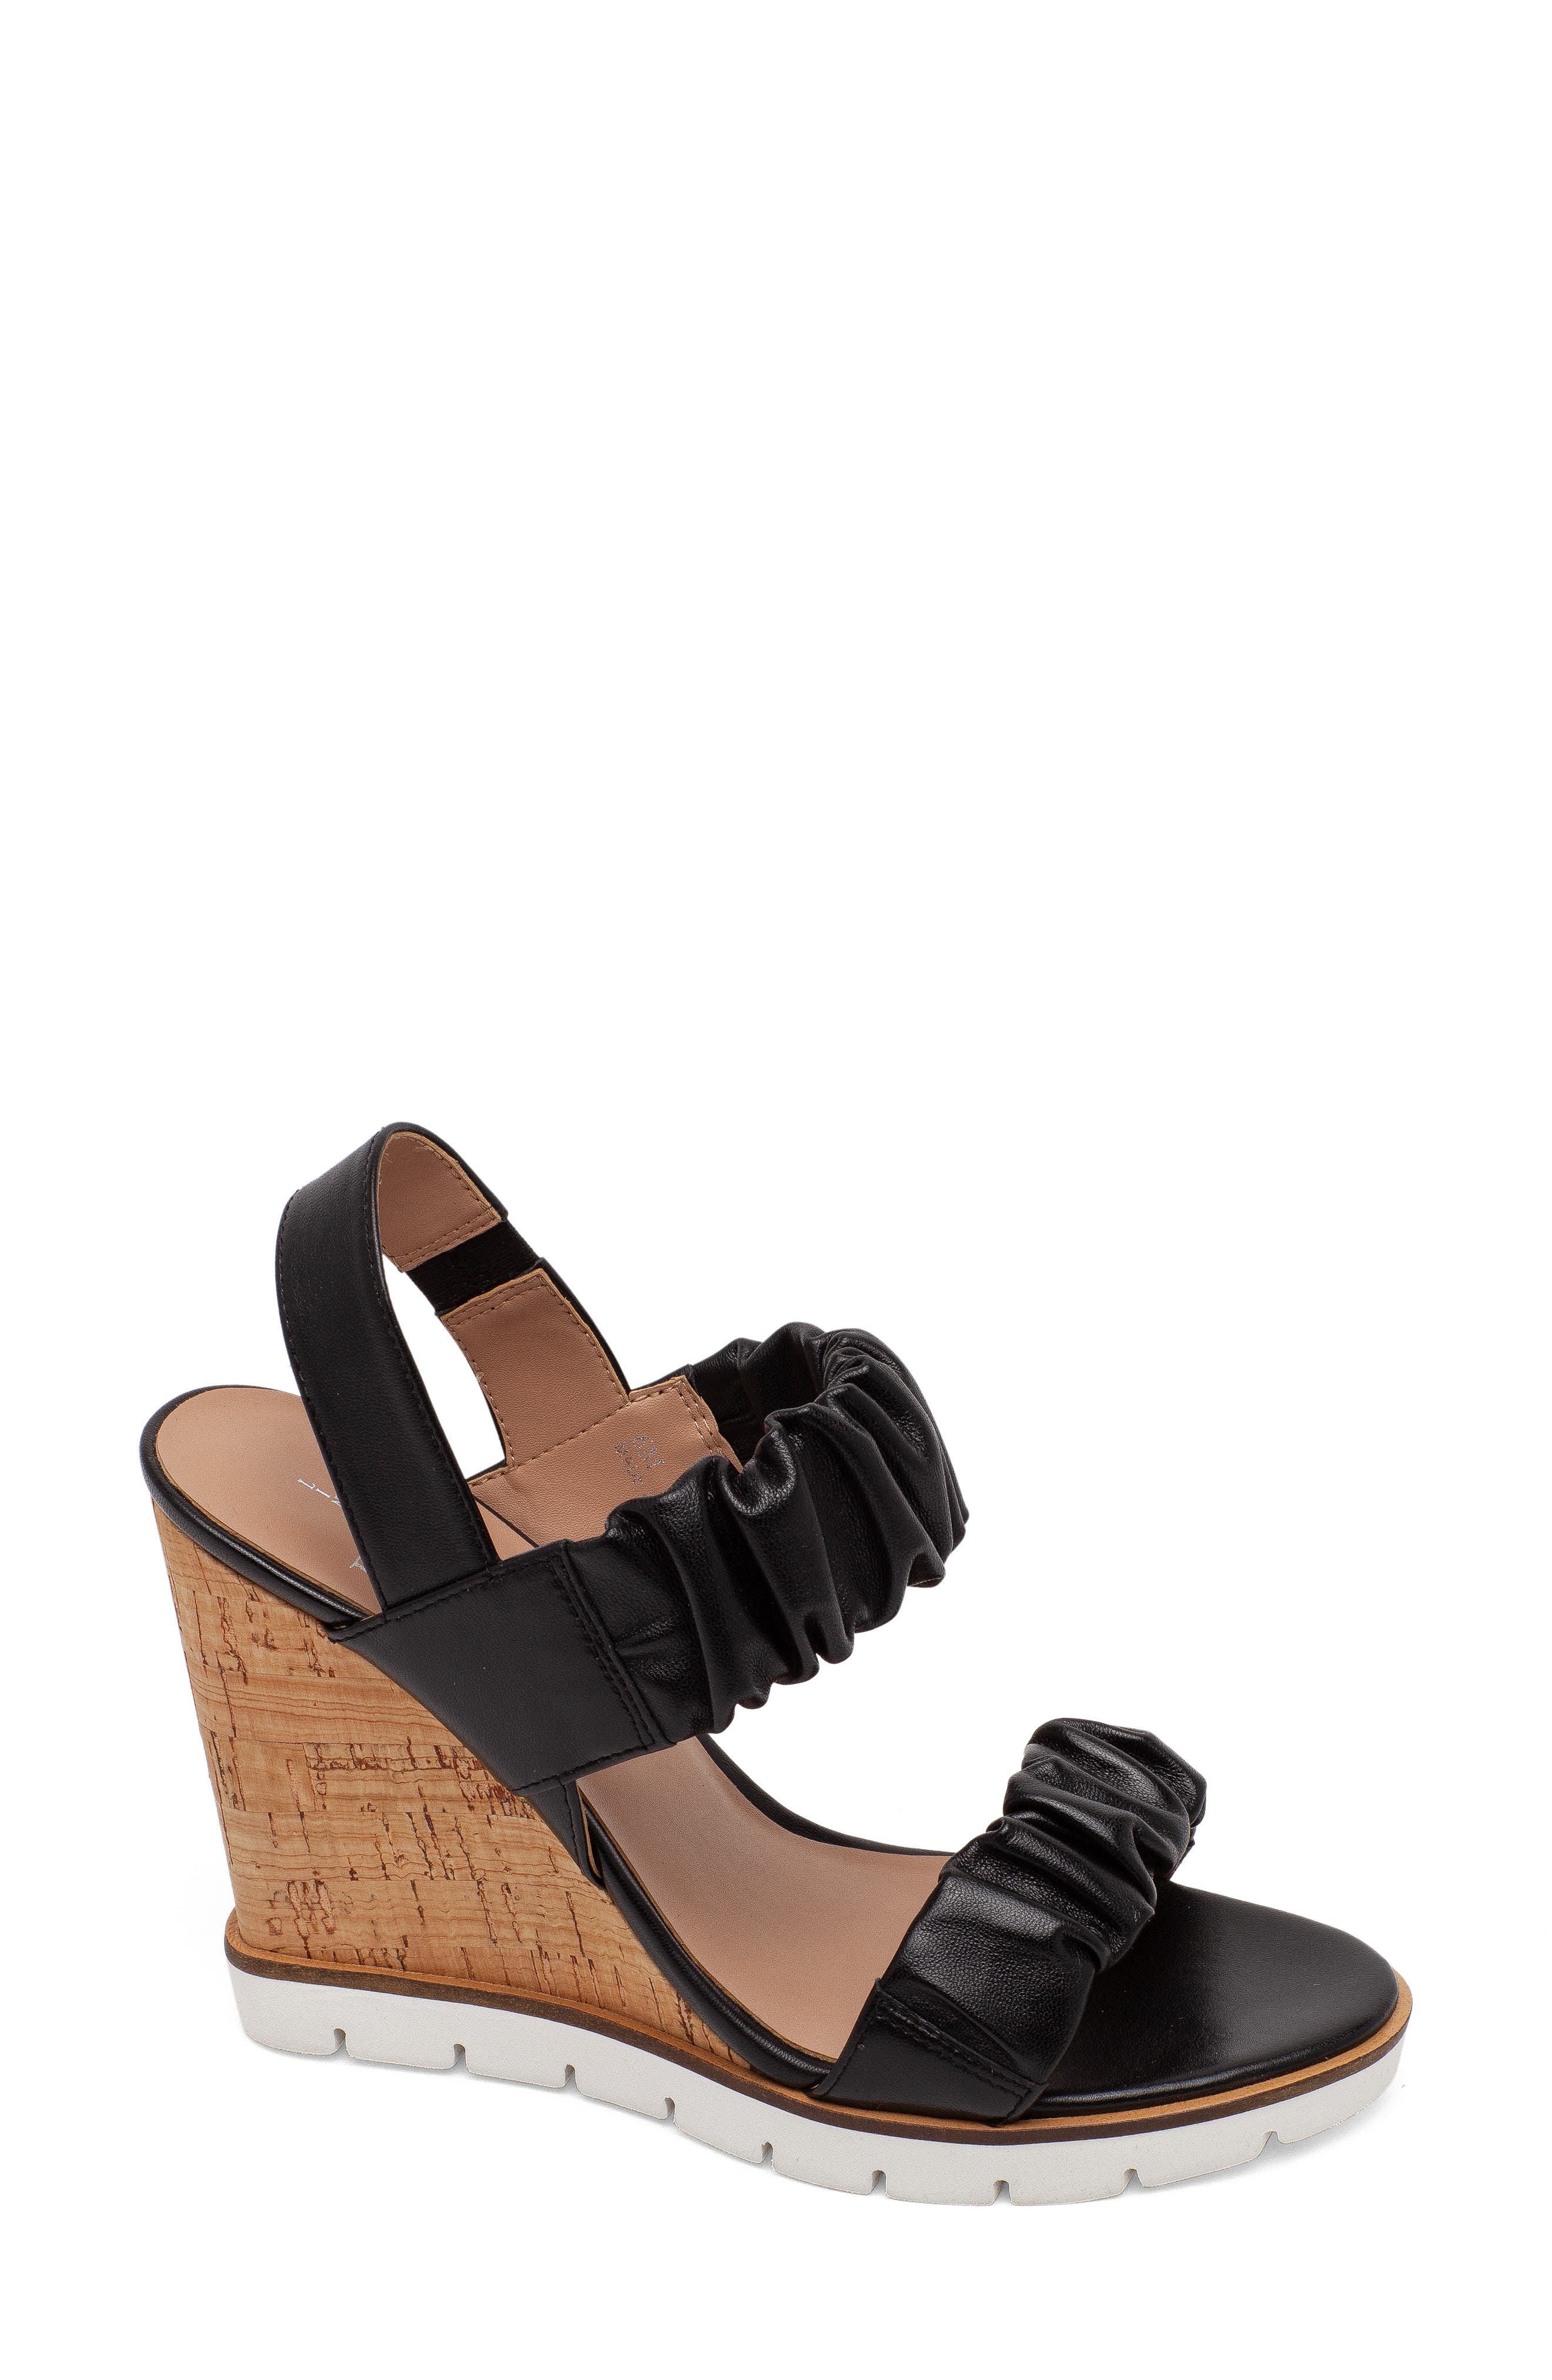 Nordstrom Women Shoes High Heels Wedges Wedge Sandals Cacatua Wedge Slingback Sandal in Combi Negro at Nordstrom 